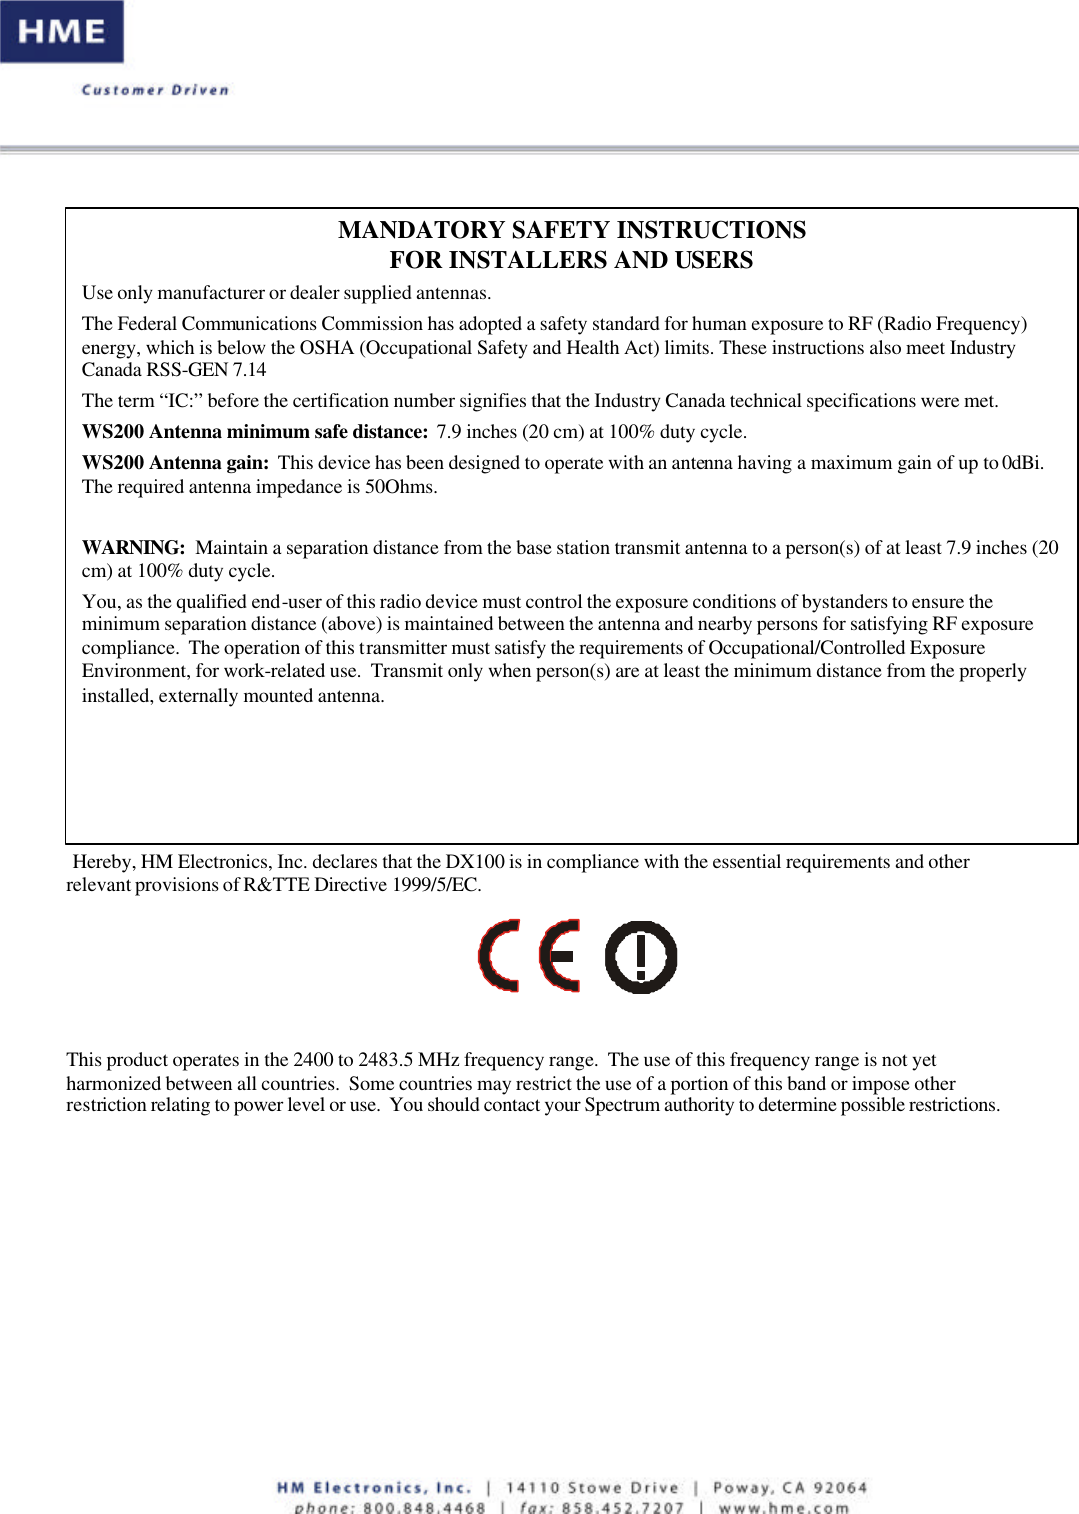    Hereby, HM Electronics, Inc. declares that the DX100 is in compliance with the essential requirements and other relevant provisions of R&amp;TTE Directive 1999/5/EC.      This product operates in the 2400 to 2483.5 MHz frequency range.  The use of this frequency range is not yet harmonized between all countries.  Some countries may restrict the use of a portion of this band or impose other restriction relating to power level or use.  You should contact your Spectrum authority to determine possible restrictions.   MANDATORY SAFETY INSTRUCTIONS FOR INSTALLERS AND USERS Use only manufacturer or dealer supplied antennas.  The Federal Communications Commission has adopted a safety standard for human exposure to RF (Radio Frequency) energy, which is below the OSHA (Occupational Safety and Health Act) limits. These instructions also meet Industry Canada RSS-GEN 7.14 The term “IC:” before the certification number signifies that the Industry Canada technical specifications were met. WS200 Antenna minimum safe distance:  7.9 inches (20 cm) at 100% duty cycle. WS200 Antenna gain:  This device has been designed to operate with an antenna having a maximum gain of up to 0dBi. The required antenna impedance is 50Ohms.  WARNING:  Maintain a separation distance from the base station transmit antenna to a person(s) of at least 7.9 inches (20 cm) at 100% duty cycle. You, as the qualified end-user of this radio device must control the exposure conditions of bystanders to ensure the minimum separation distance (above) is maintained between the antenna and nearby persons for satisfying RF exposure compliance.  The operation of this transmitter must satisfy the requirements of Occupational/Controlled Exposure Environment, for work-related use.  Transmit only when person(s) are at least the minimum distance from the properly installed, externally mounted antenna. 